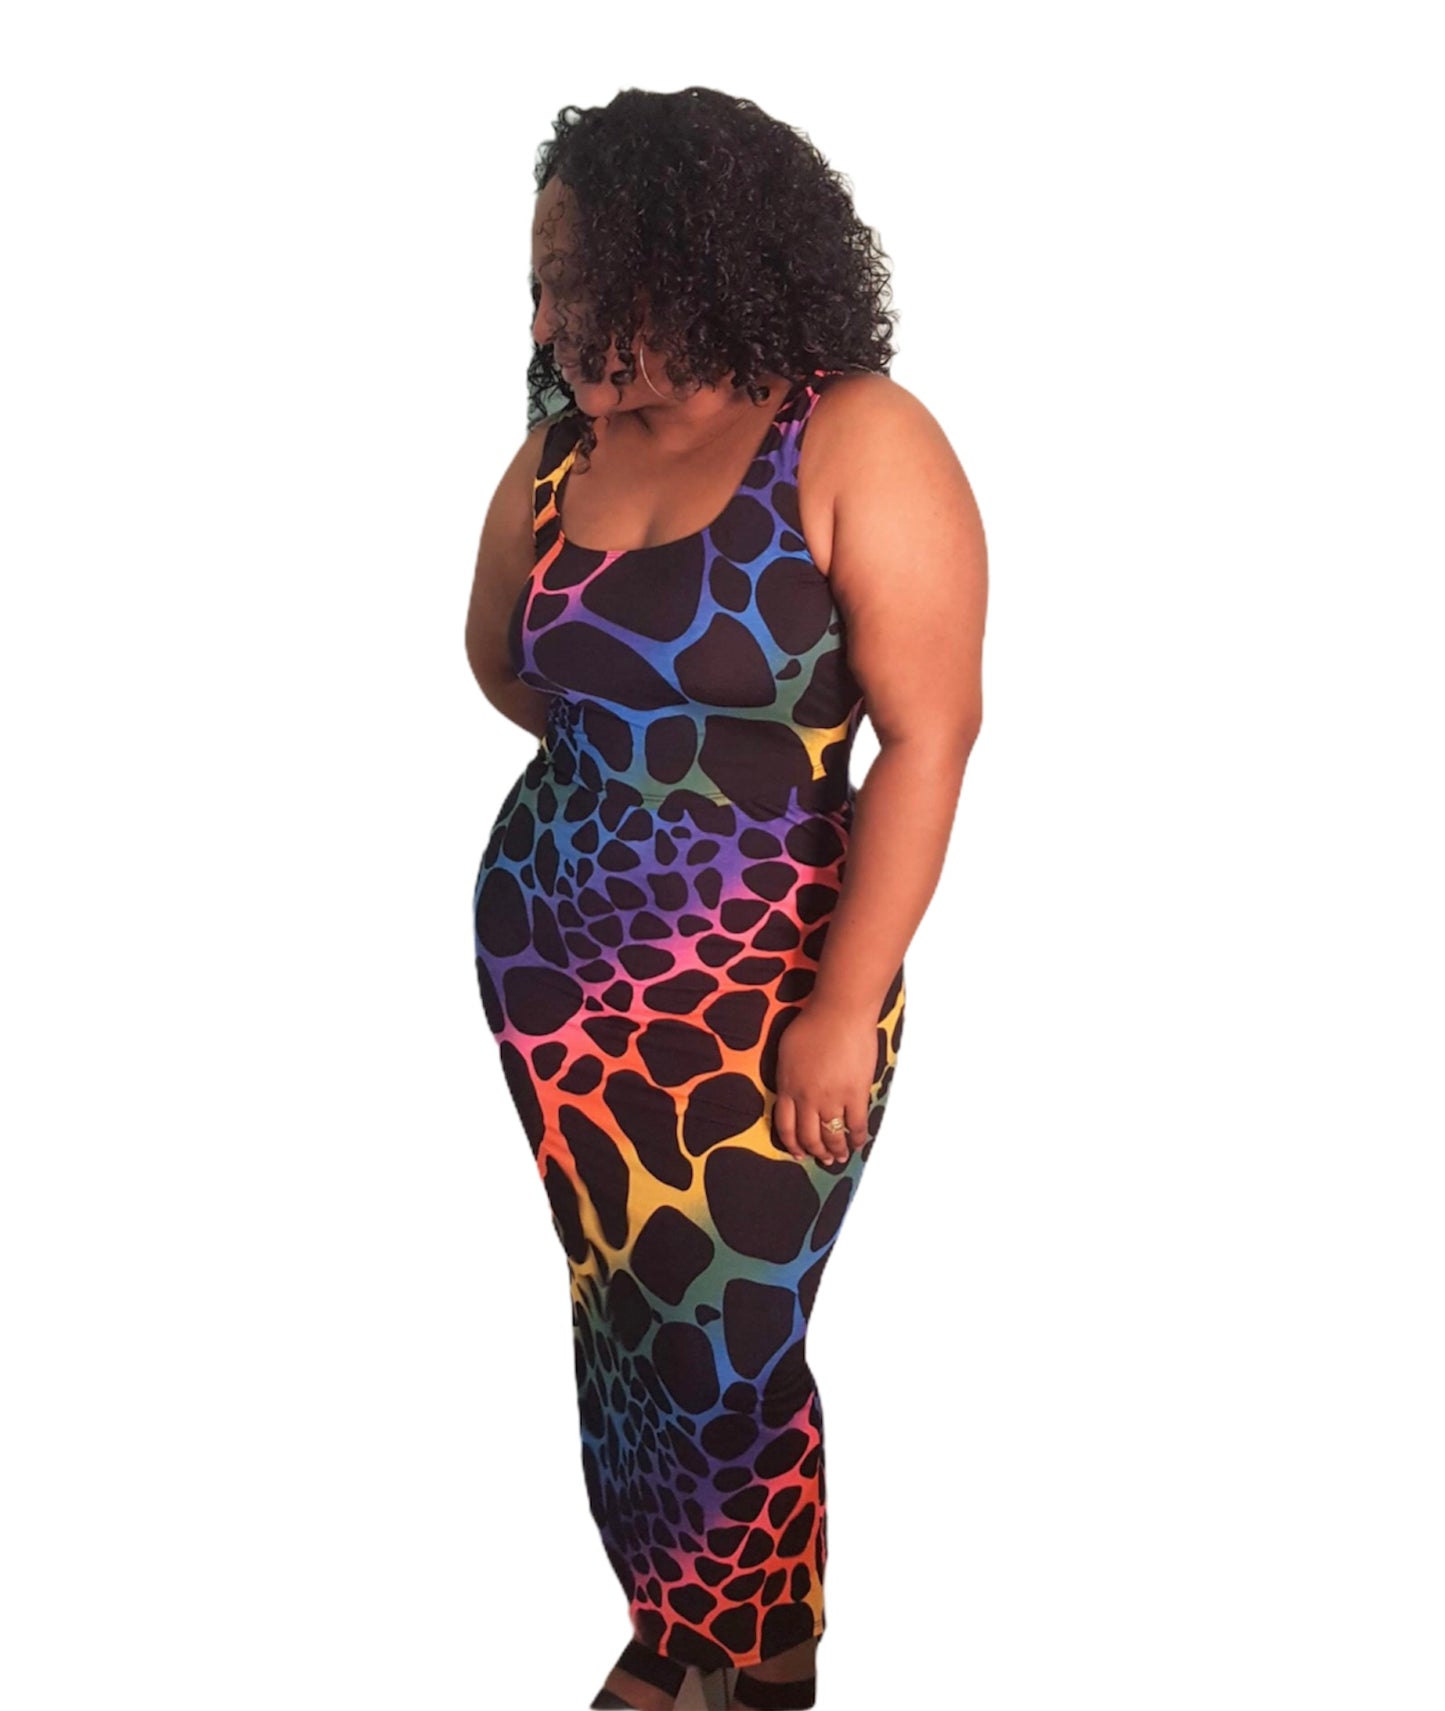 Night Life Crop Top and Skirt - Plus Size